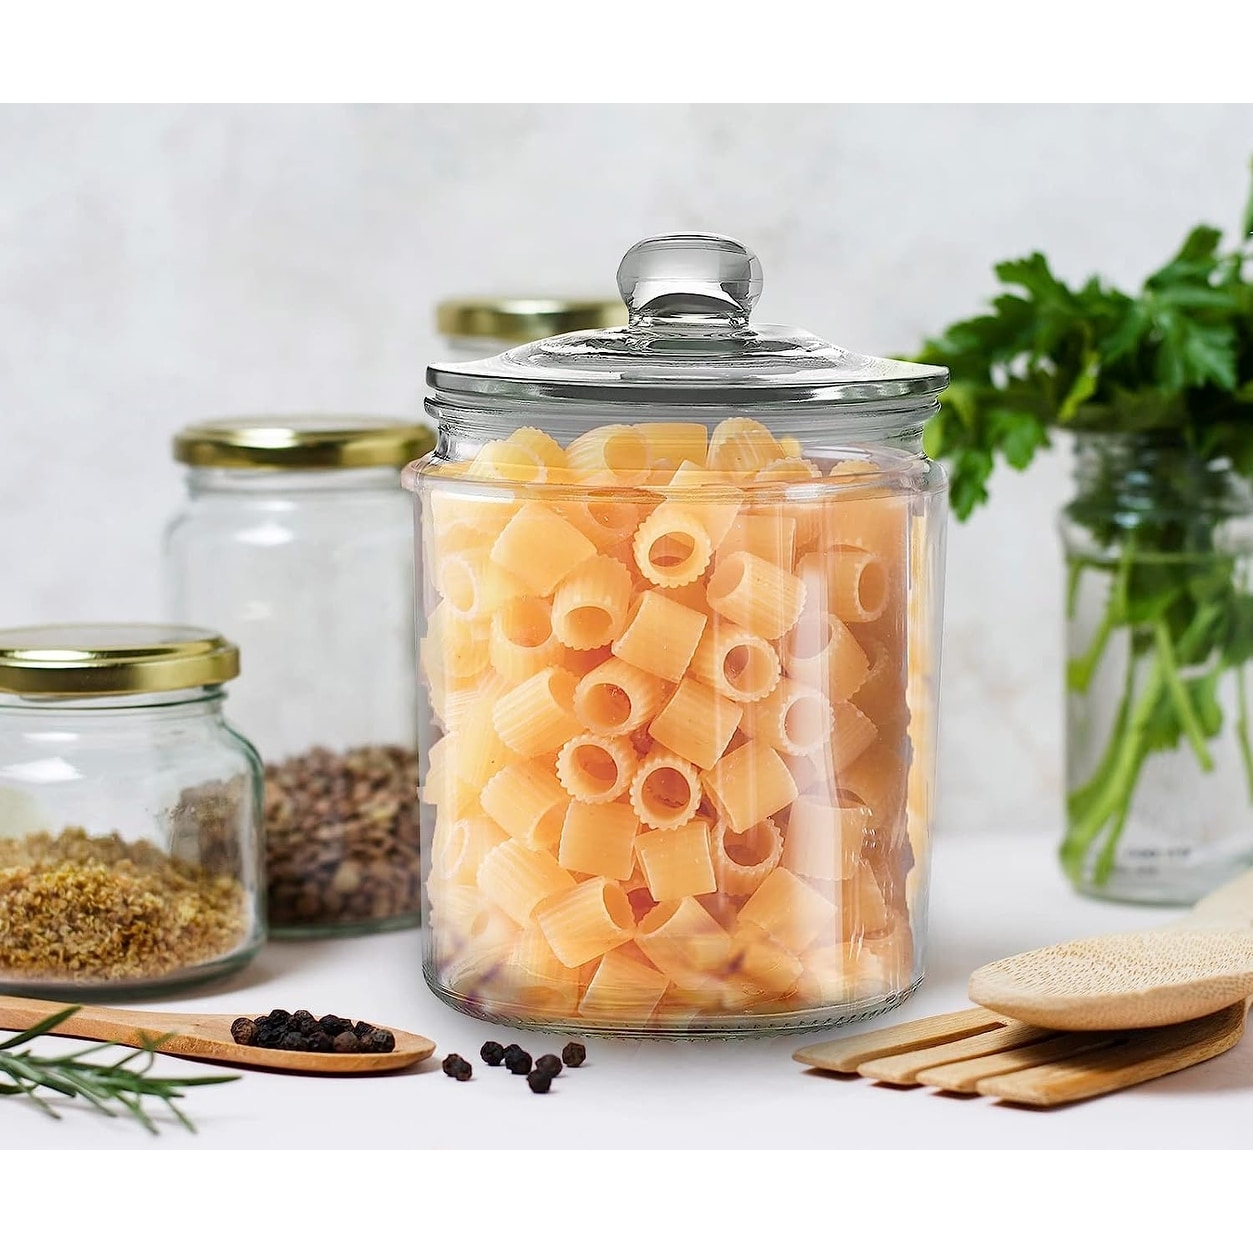 Set of 3 Glass Jar with Lid (1 Liter), Airtight Glass Storage Container  for Food, Flour, Pasta, Coffee, Candy, Dog Treats, Snacks, Glass  Organization Canisters for Home & Kitchen